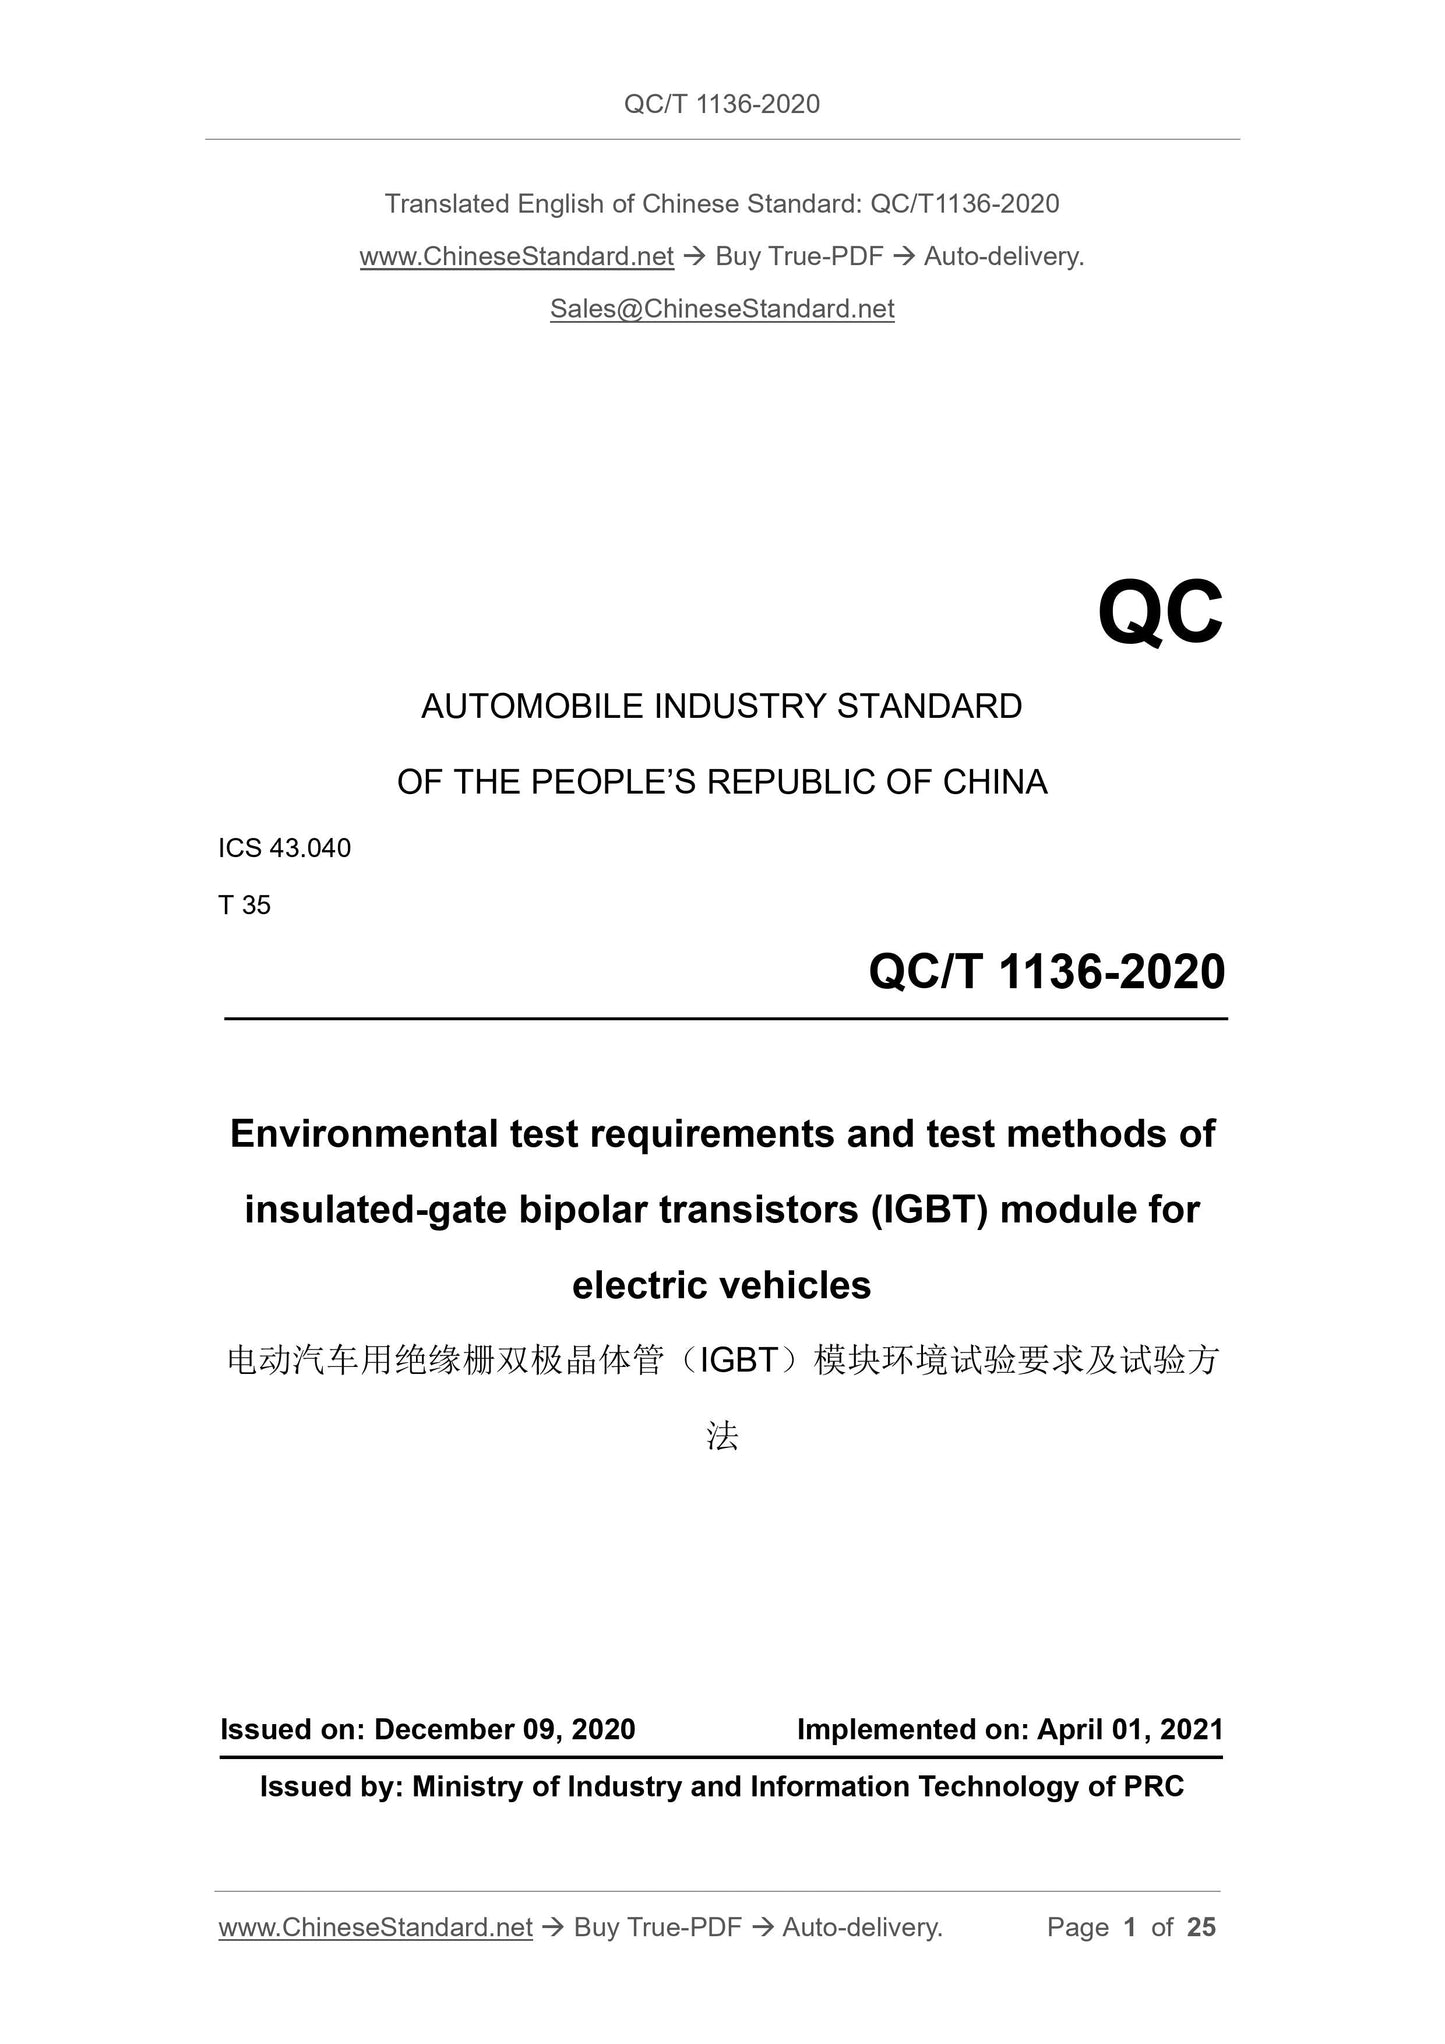 QC/T 1136-2020 Page 1